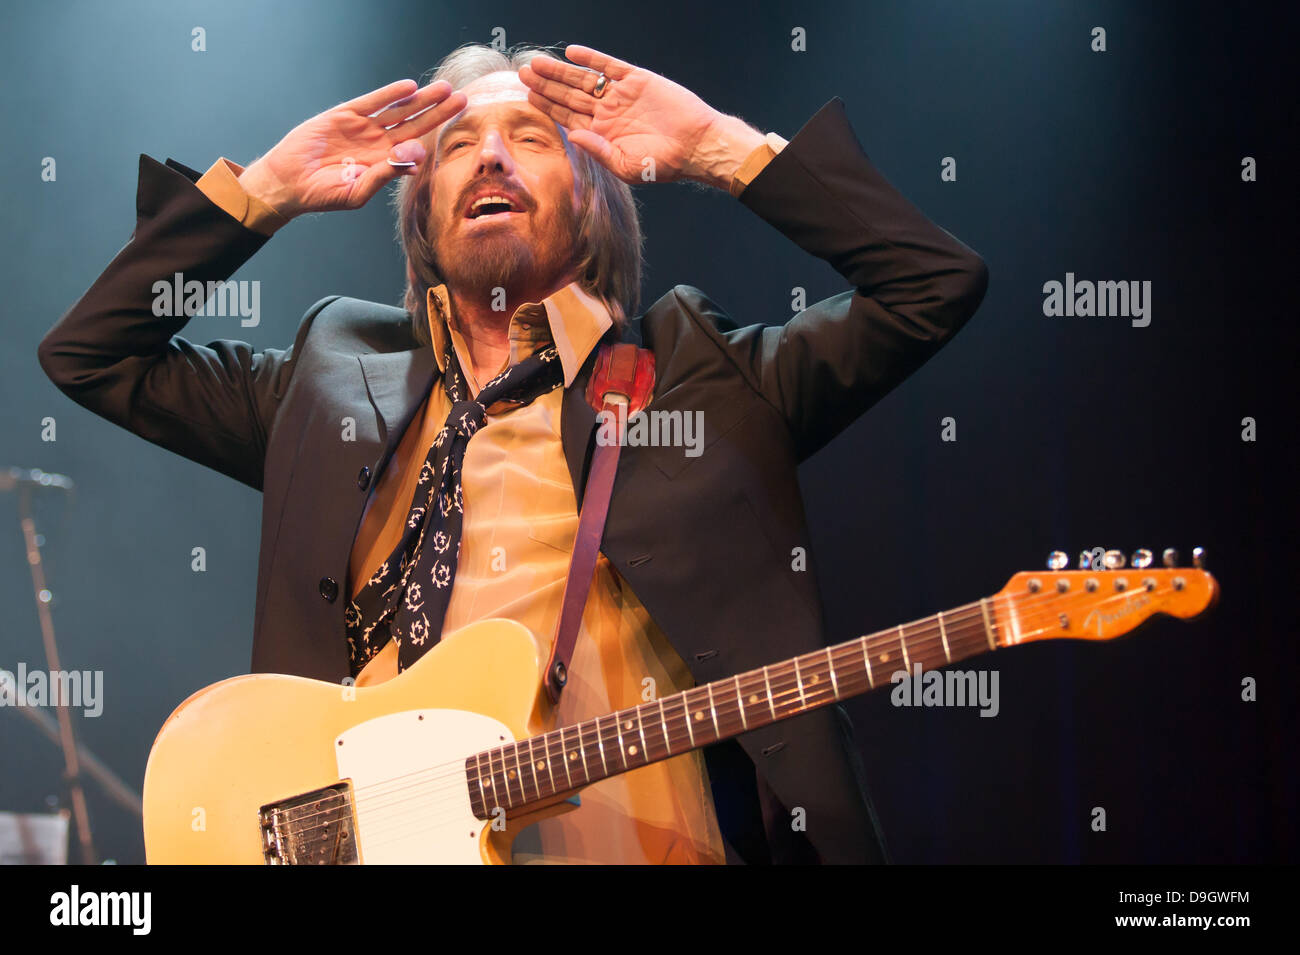 London, Ontario. June 18, 2013. Tom Petty and The Heartbreakers perform at Budweiser Gardens in London Ontario, on June 18, 2013. The sold out concert was the only Canadian date on the bands 2013 concert tour. Credit:  Mark Spowart/Alamy Live News Stock Photo